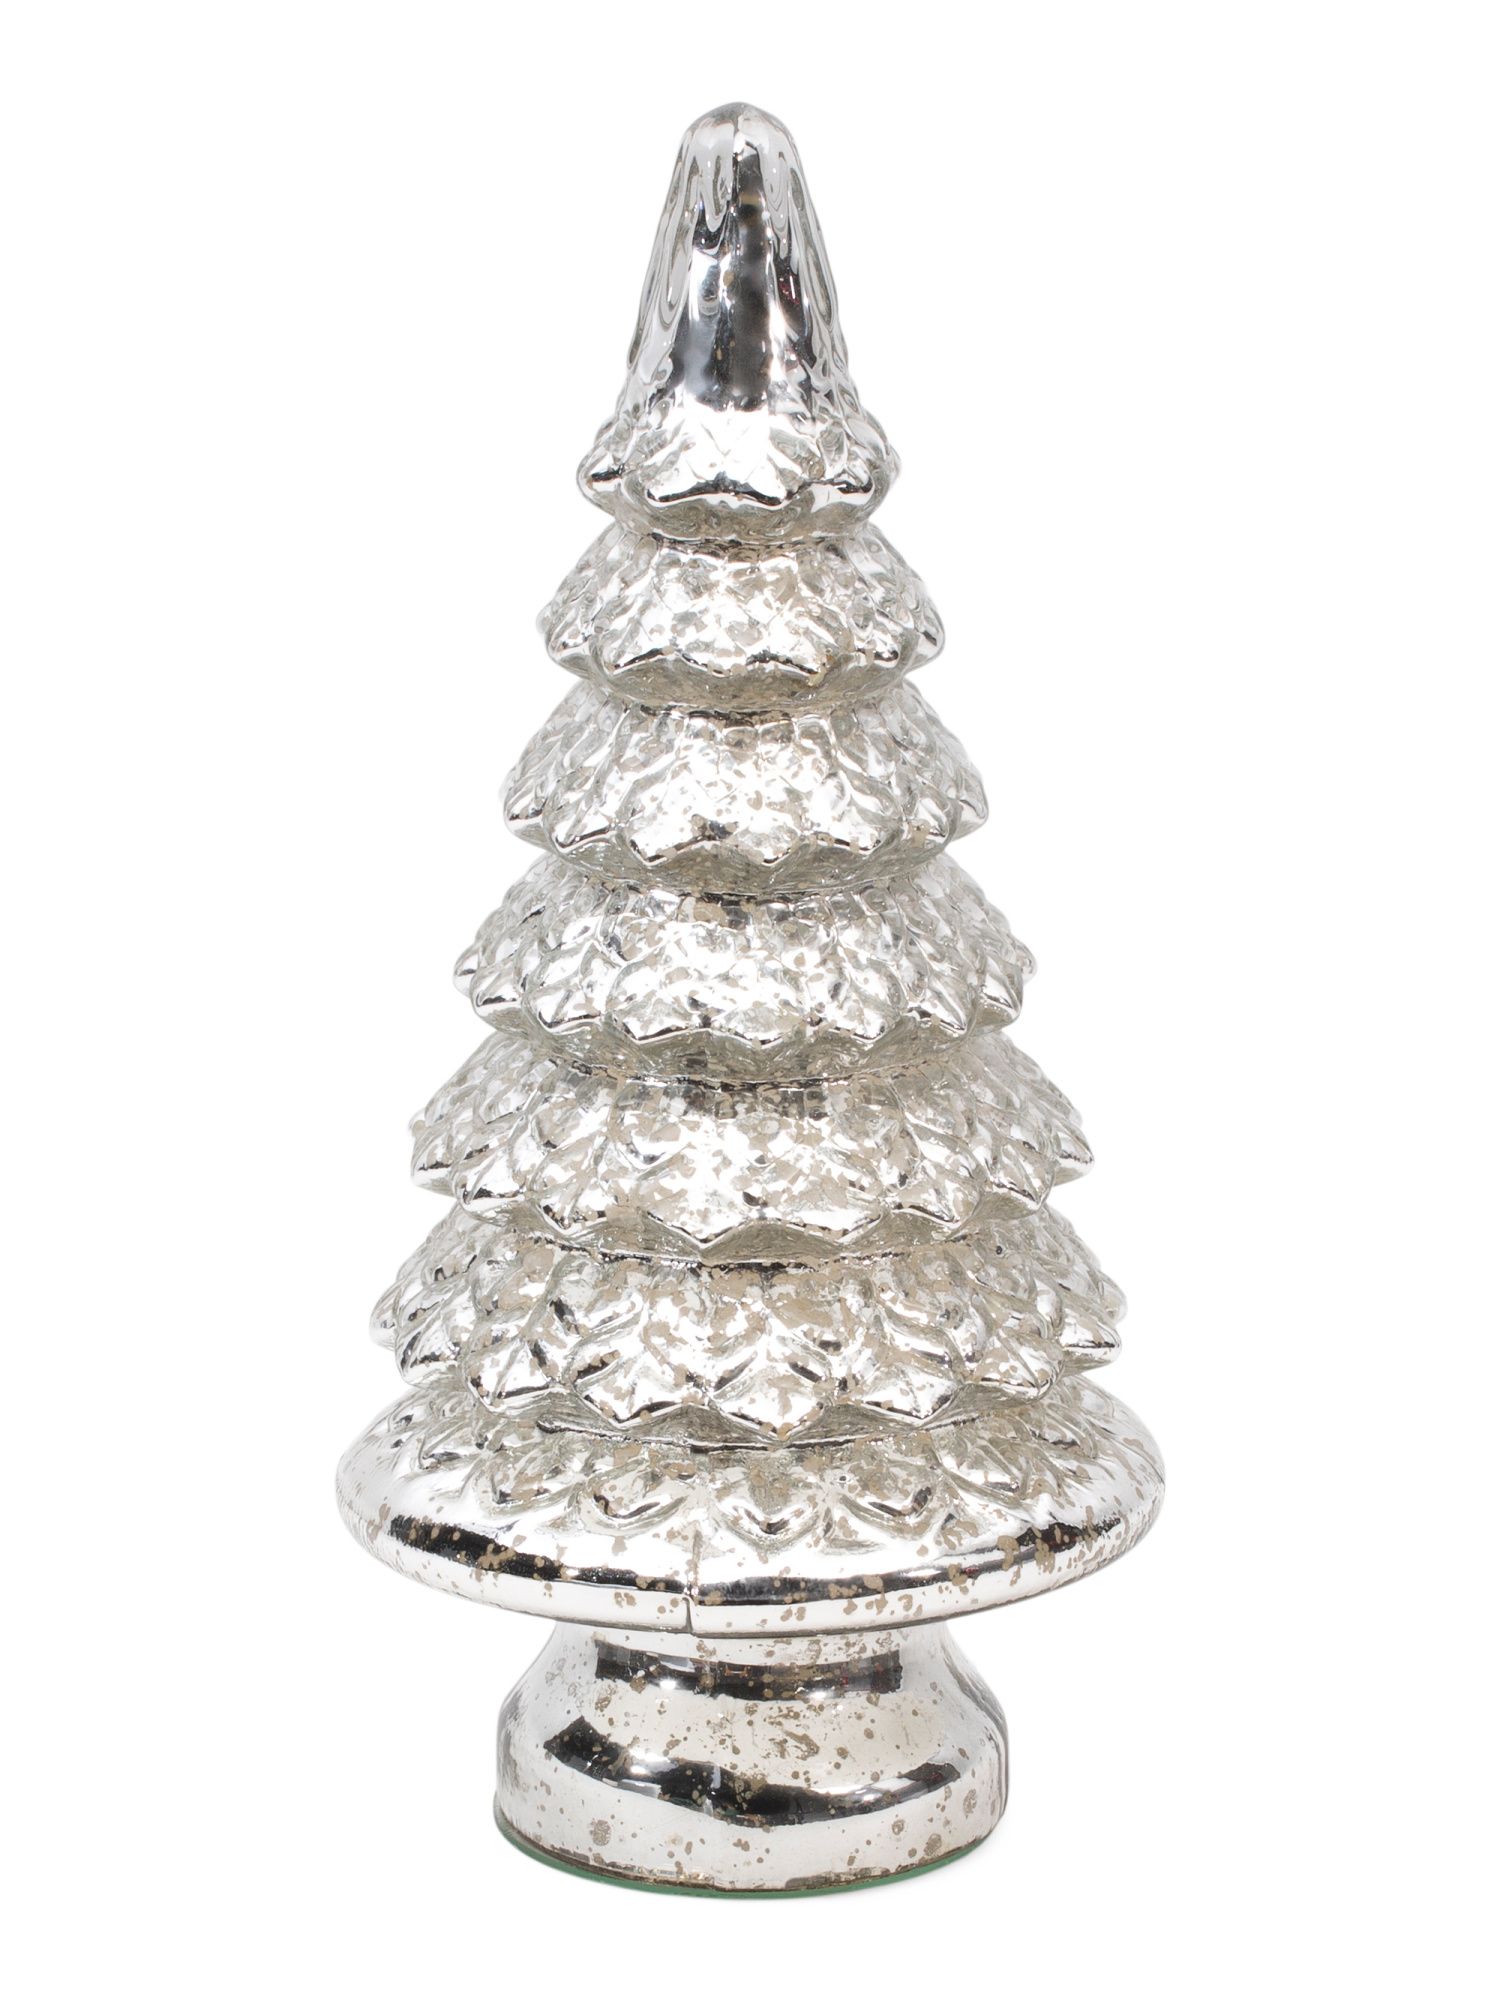 16in Antique Tiered Tree | TJ Maxx